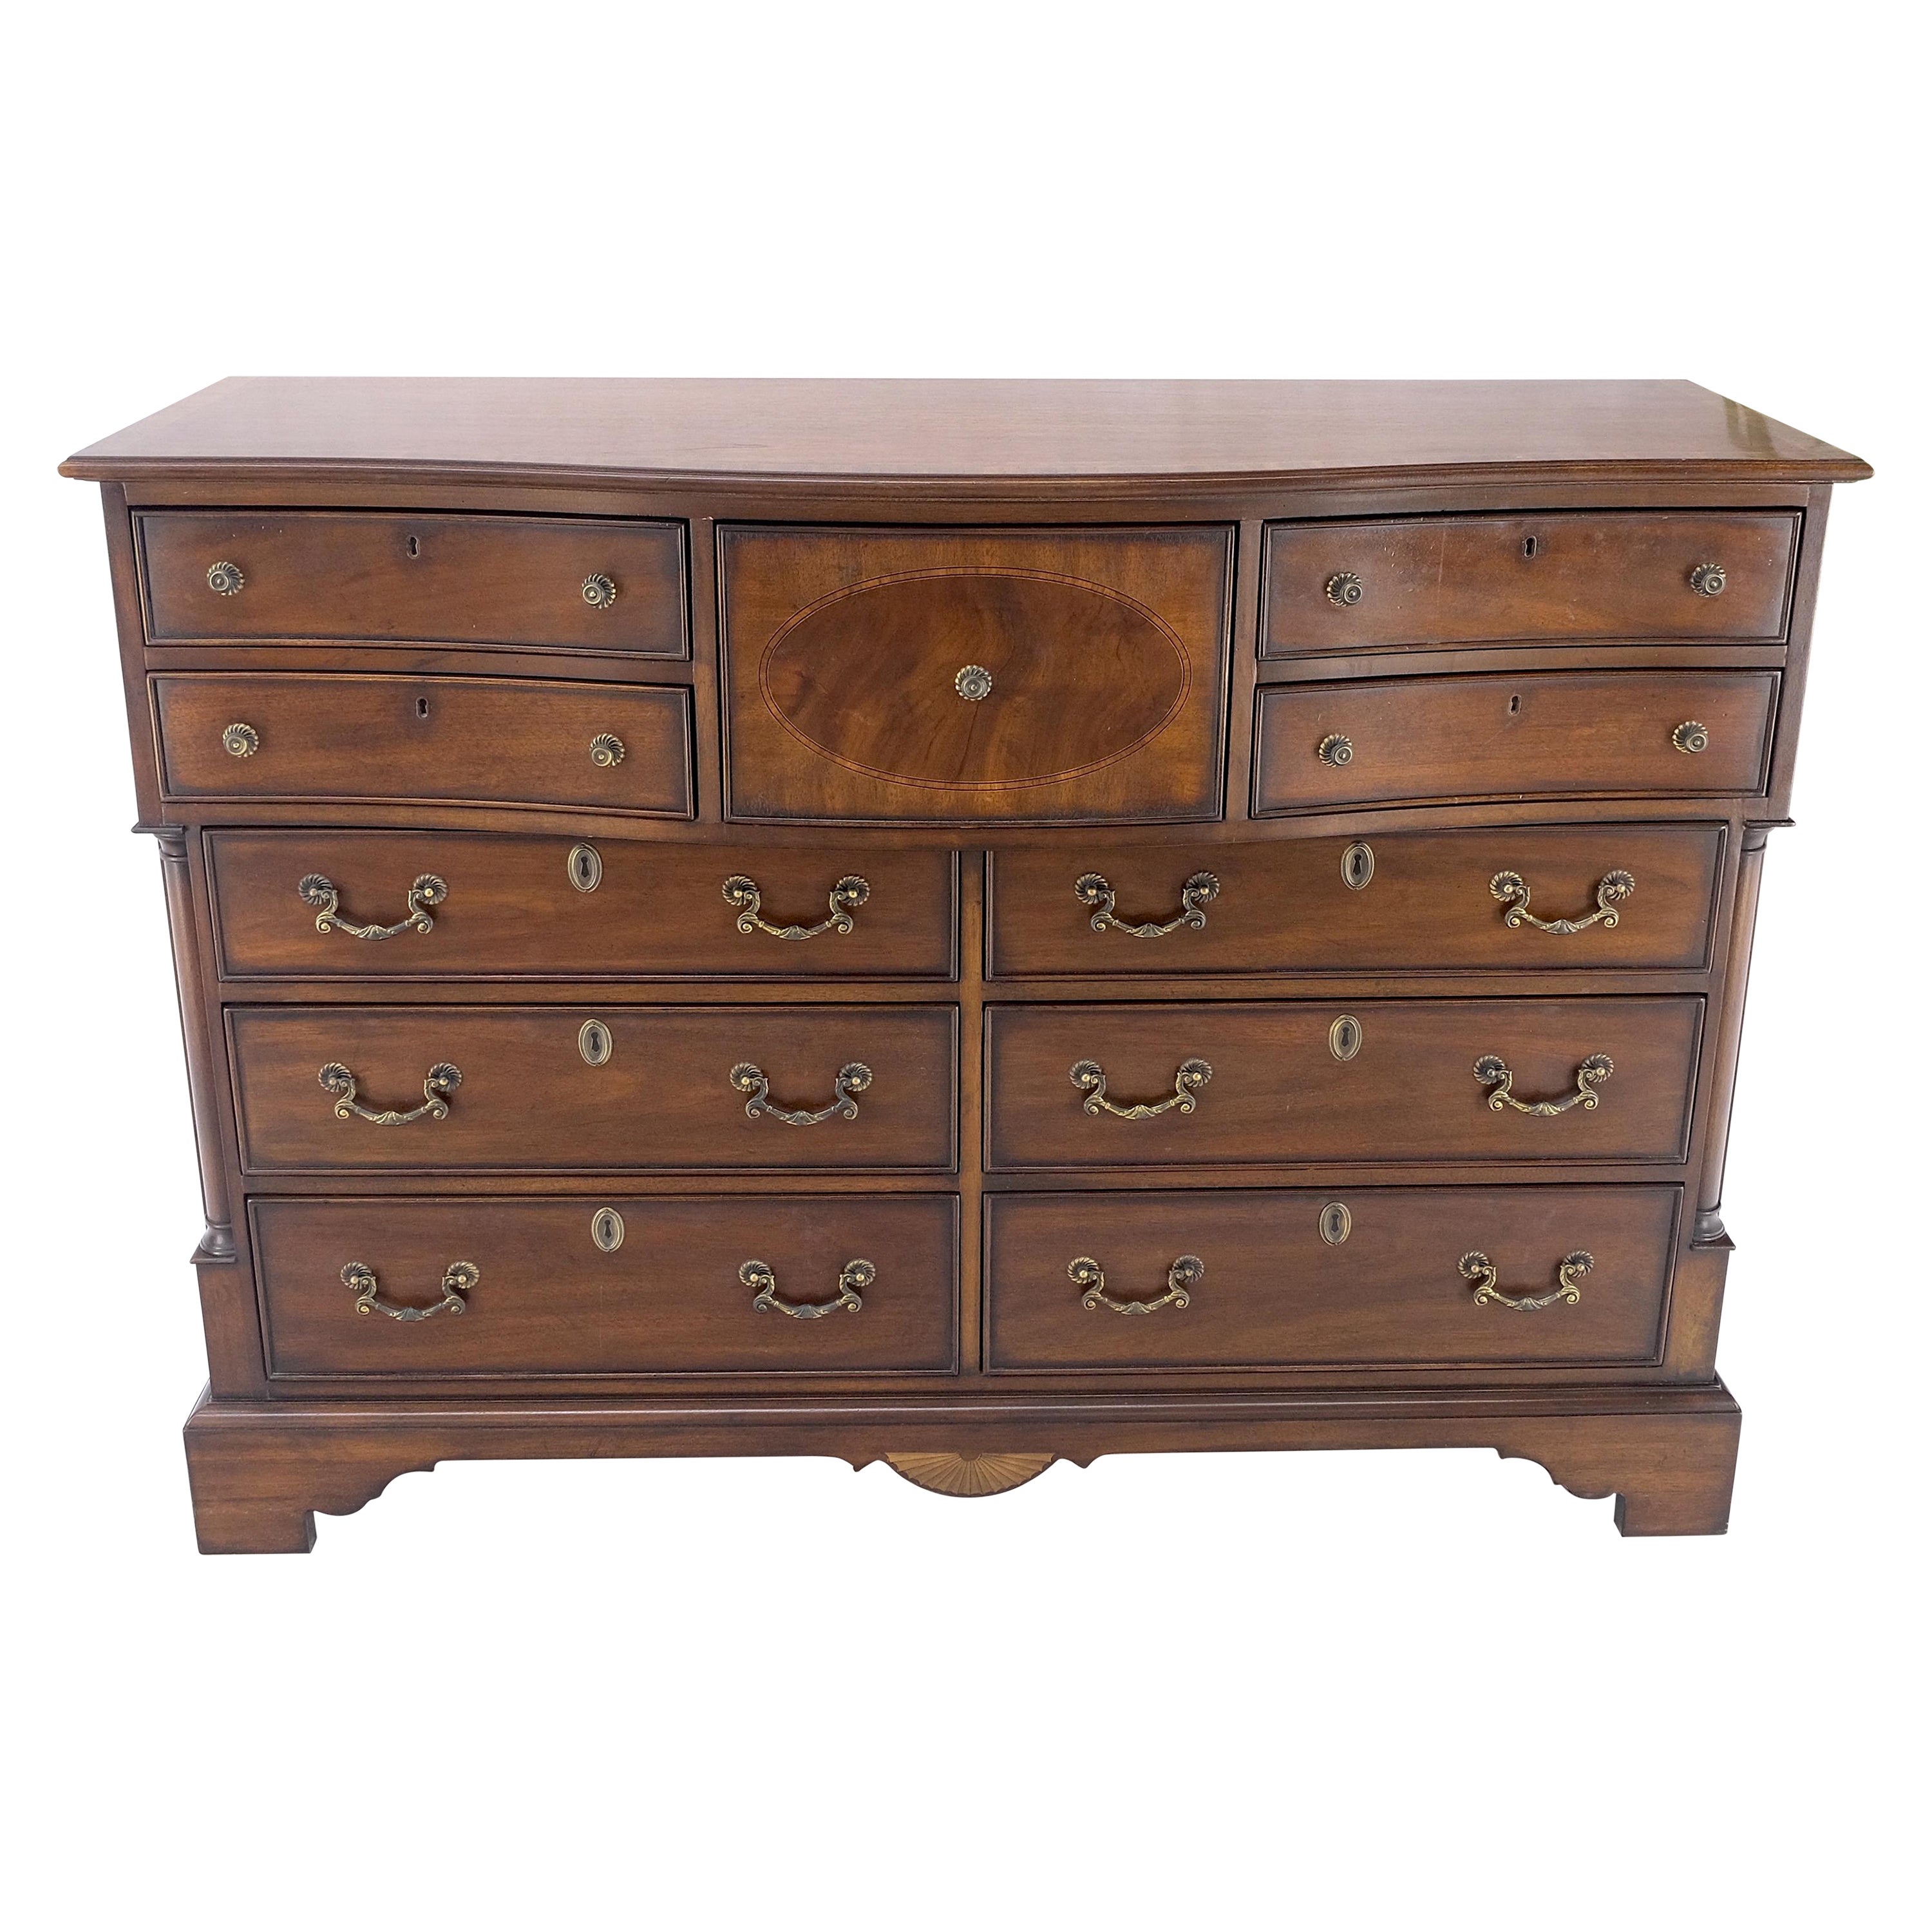 Banded Top Mahogany Inlayed Bracket Feet 11 Drawers Dresser Credenza MINT! For Sale